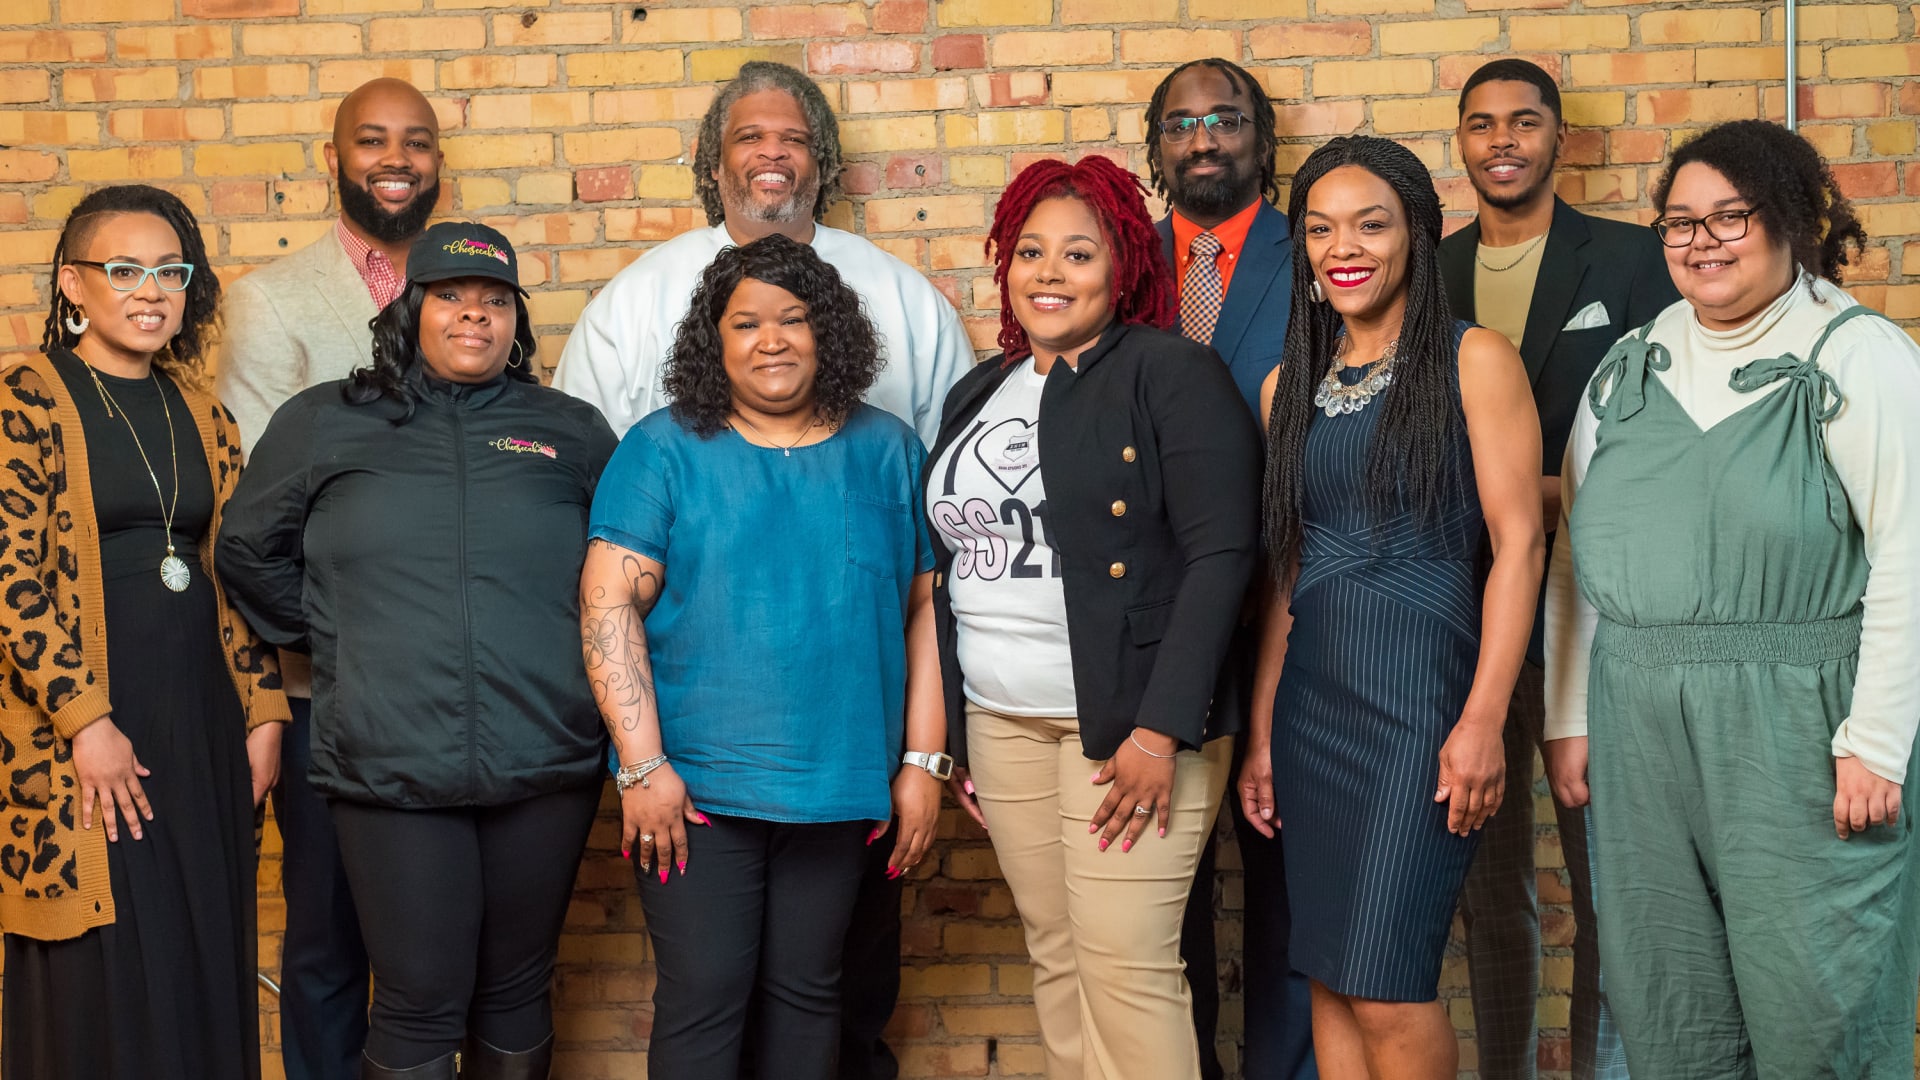 Tony Willis (top row, far left) launched Lansing Economic Area Partnership's Elevate accelerator with a $120,000 grant. The first cohort includes (back to front, left to right) Marcus Leslie, Donald Lovell, Sydney McCalib, Tiffany Norde, Deanna Ray Brown, Eva Thompson, Lorin Cumberbatch, and Nikki Thompson Frazier. Juliette Givehan, an equity specialist at LEAP, is pictured far right.